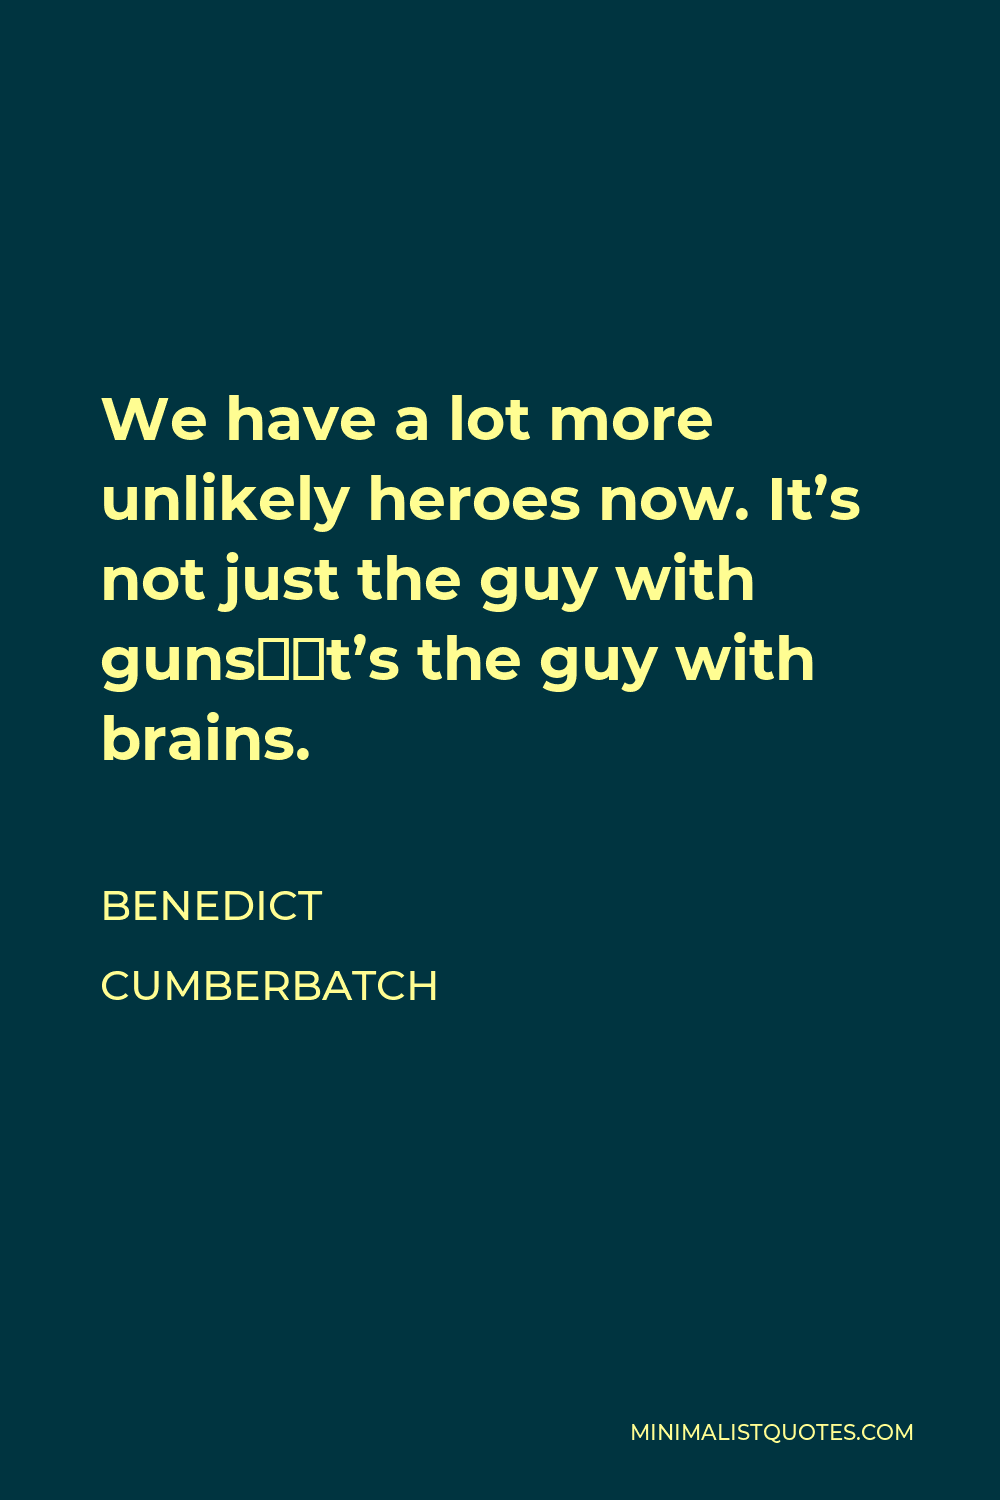 Benedict Cumberbatch Quote - We have a lot more unlikely heroes now. It’s not just the guy with guns—it’s the guy with brains.